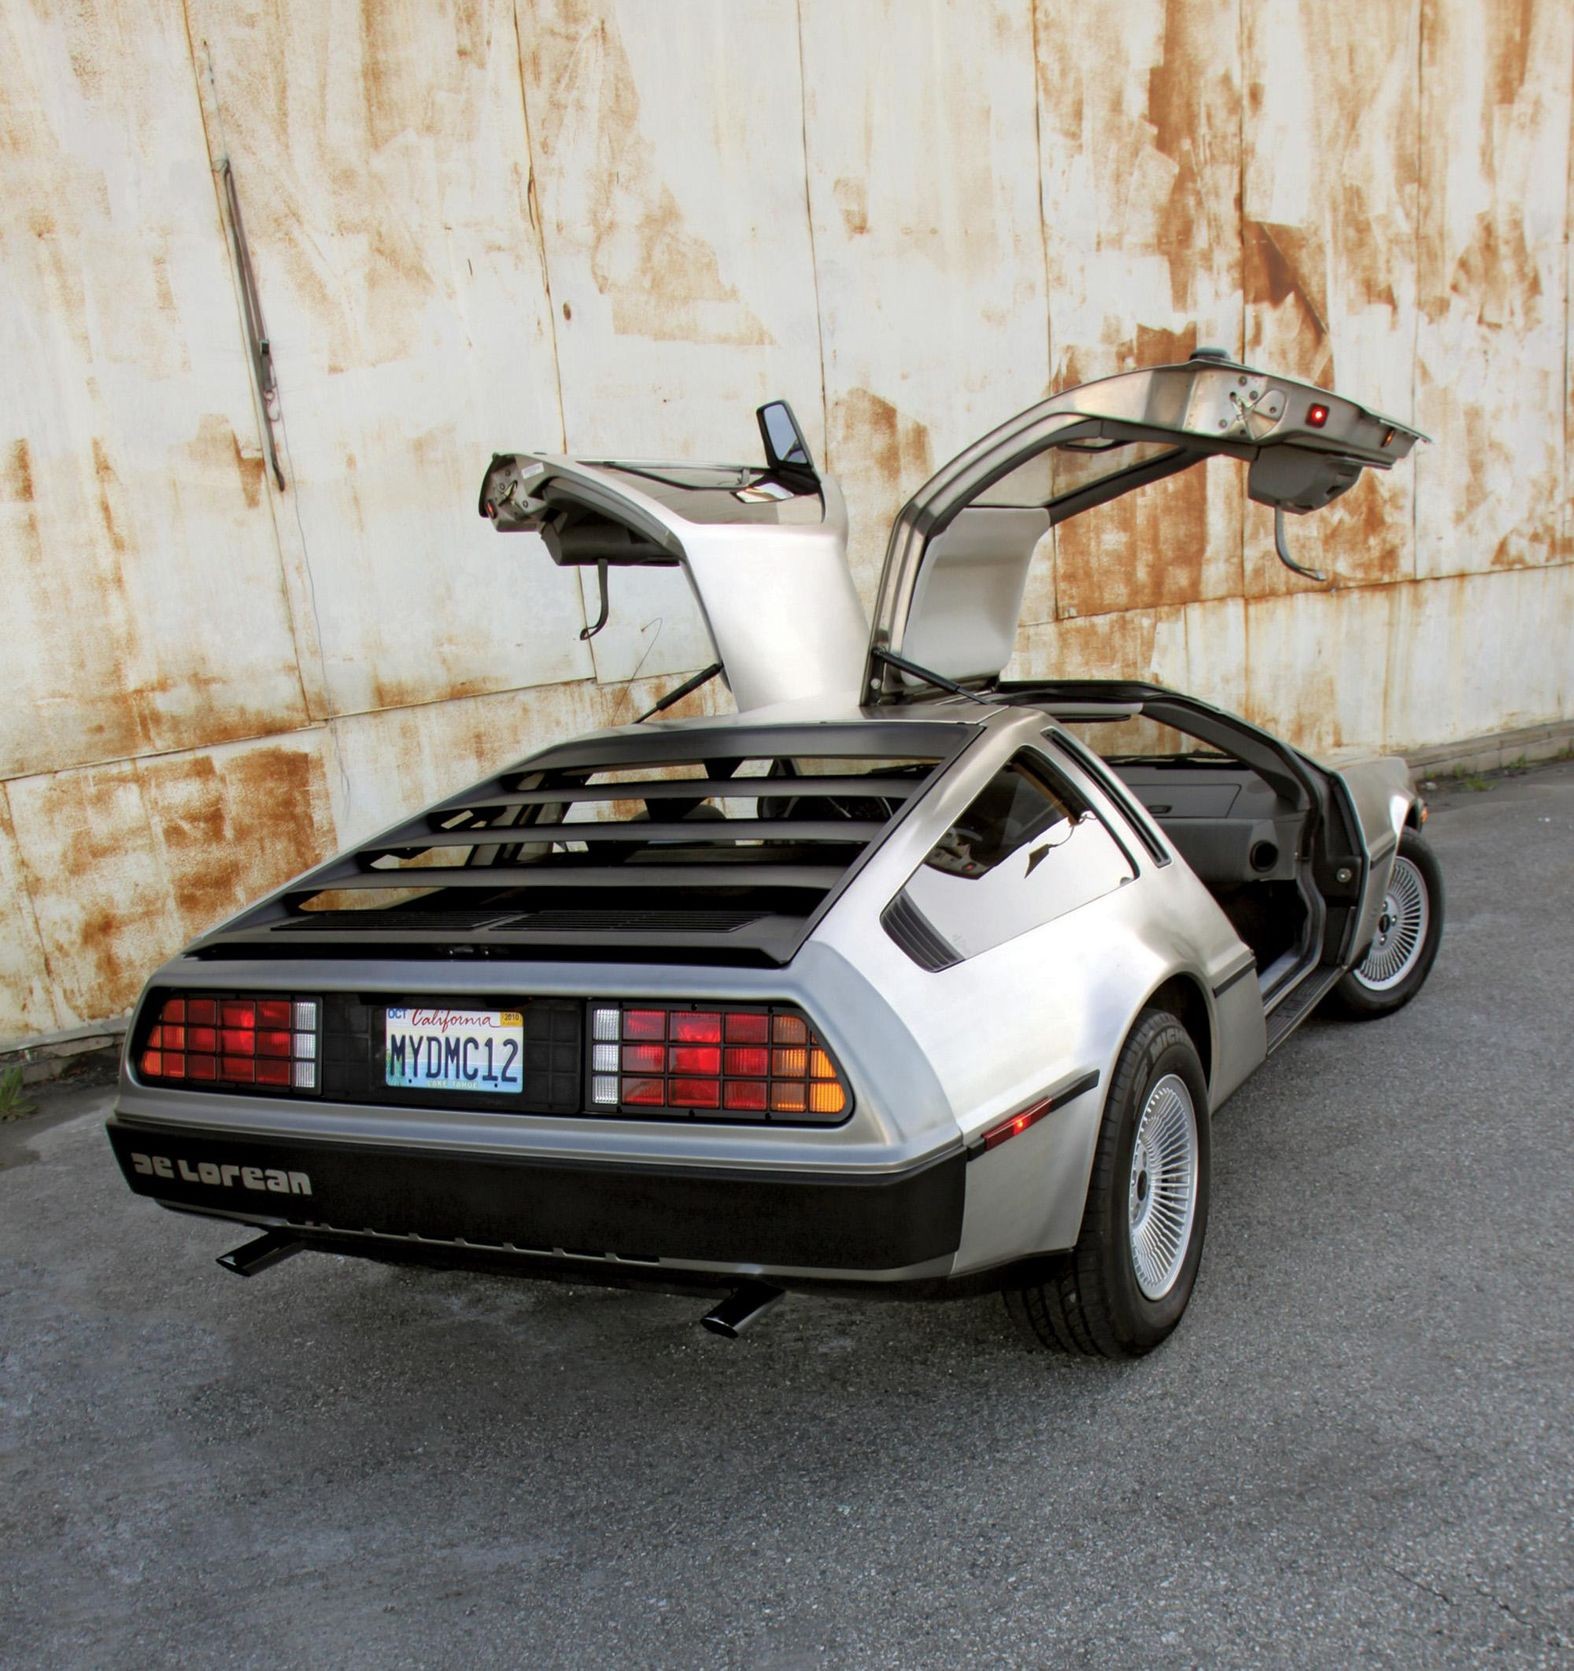 What to Look for When Buying a 1981-1983 DMC De Lorean